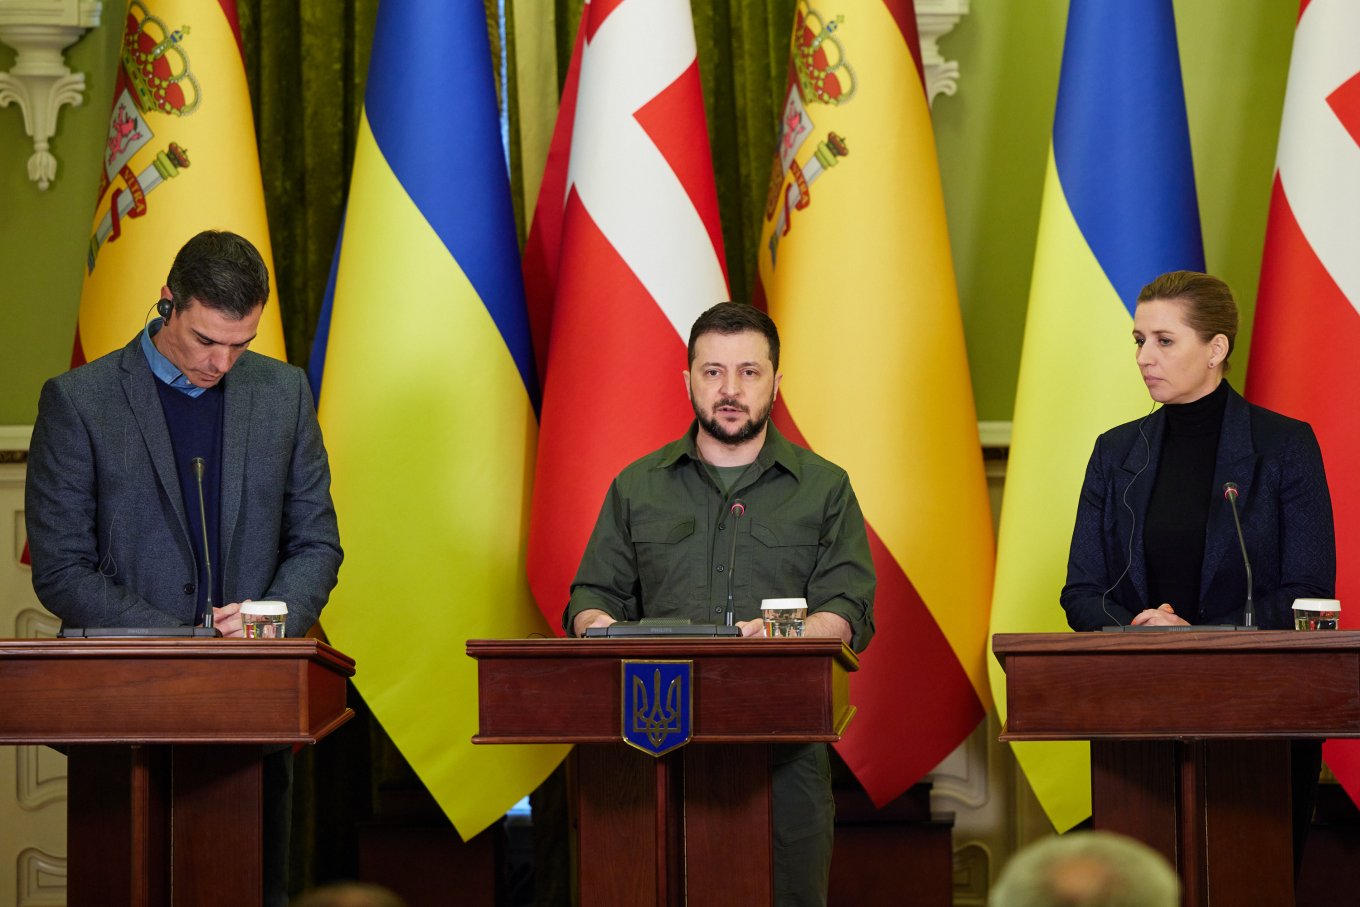 Defense Express / Meeting of the President of Ukraine with the Prime Ministers of Spain and Denmark / Day 57th of War Between Ukraine and Russian Federation (Live Updates)